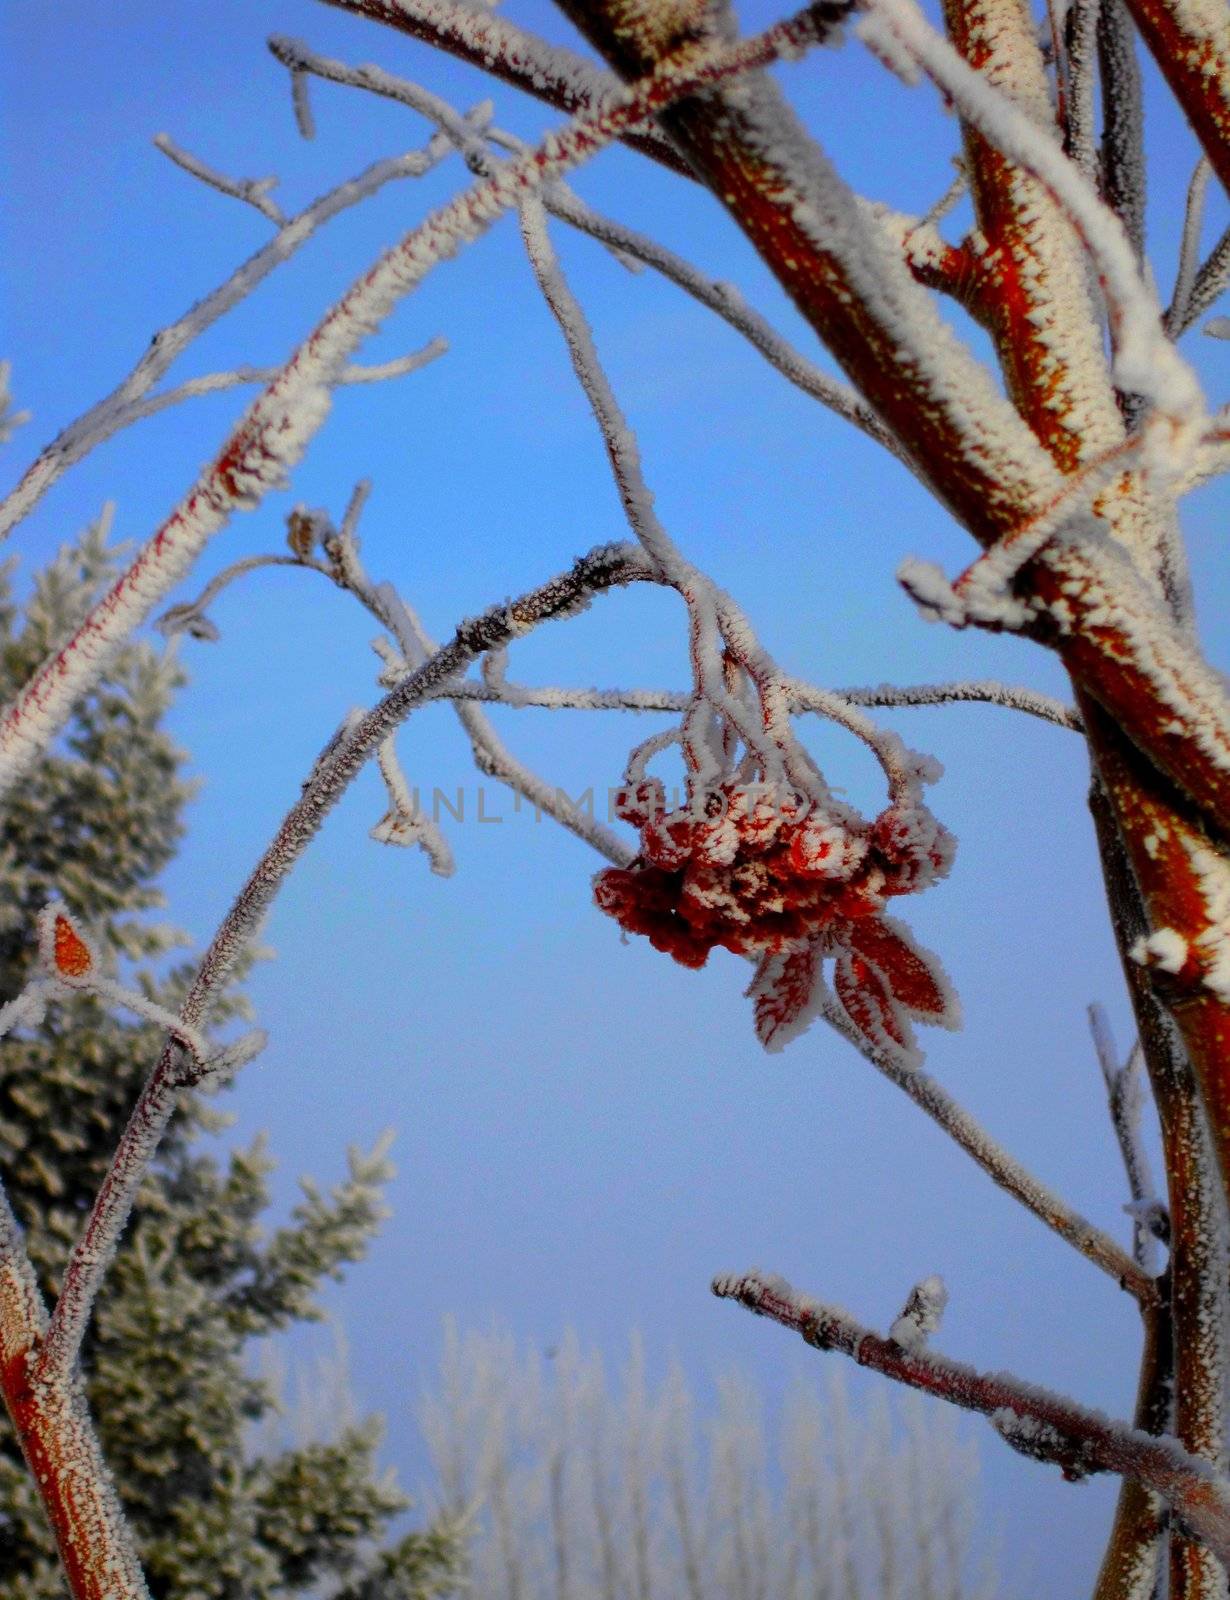 Red berried tree covered in hoar frost.